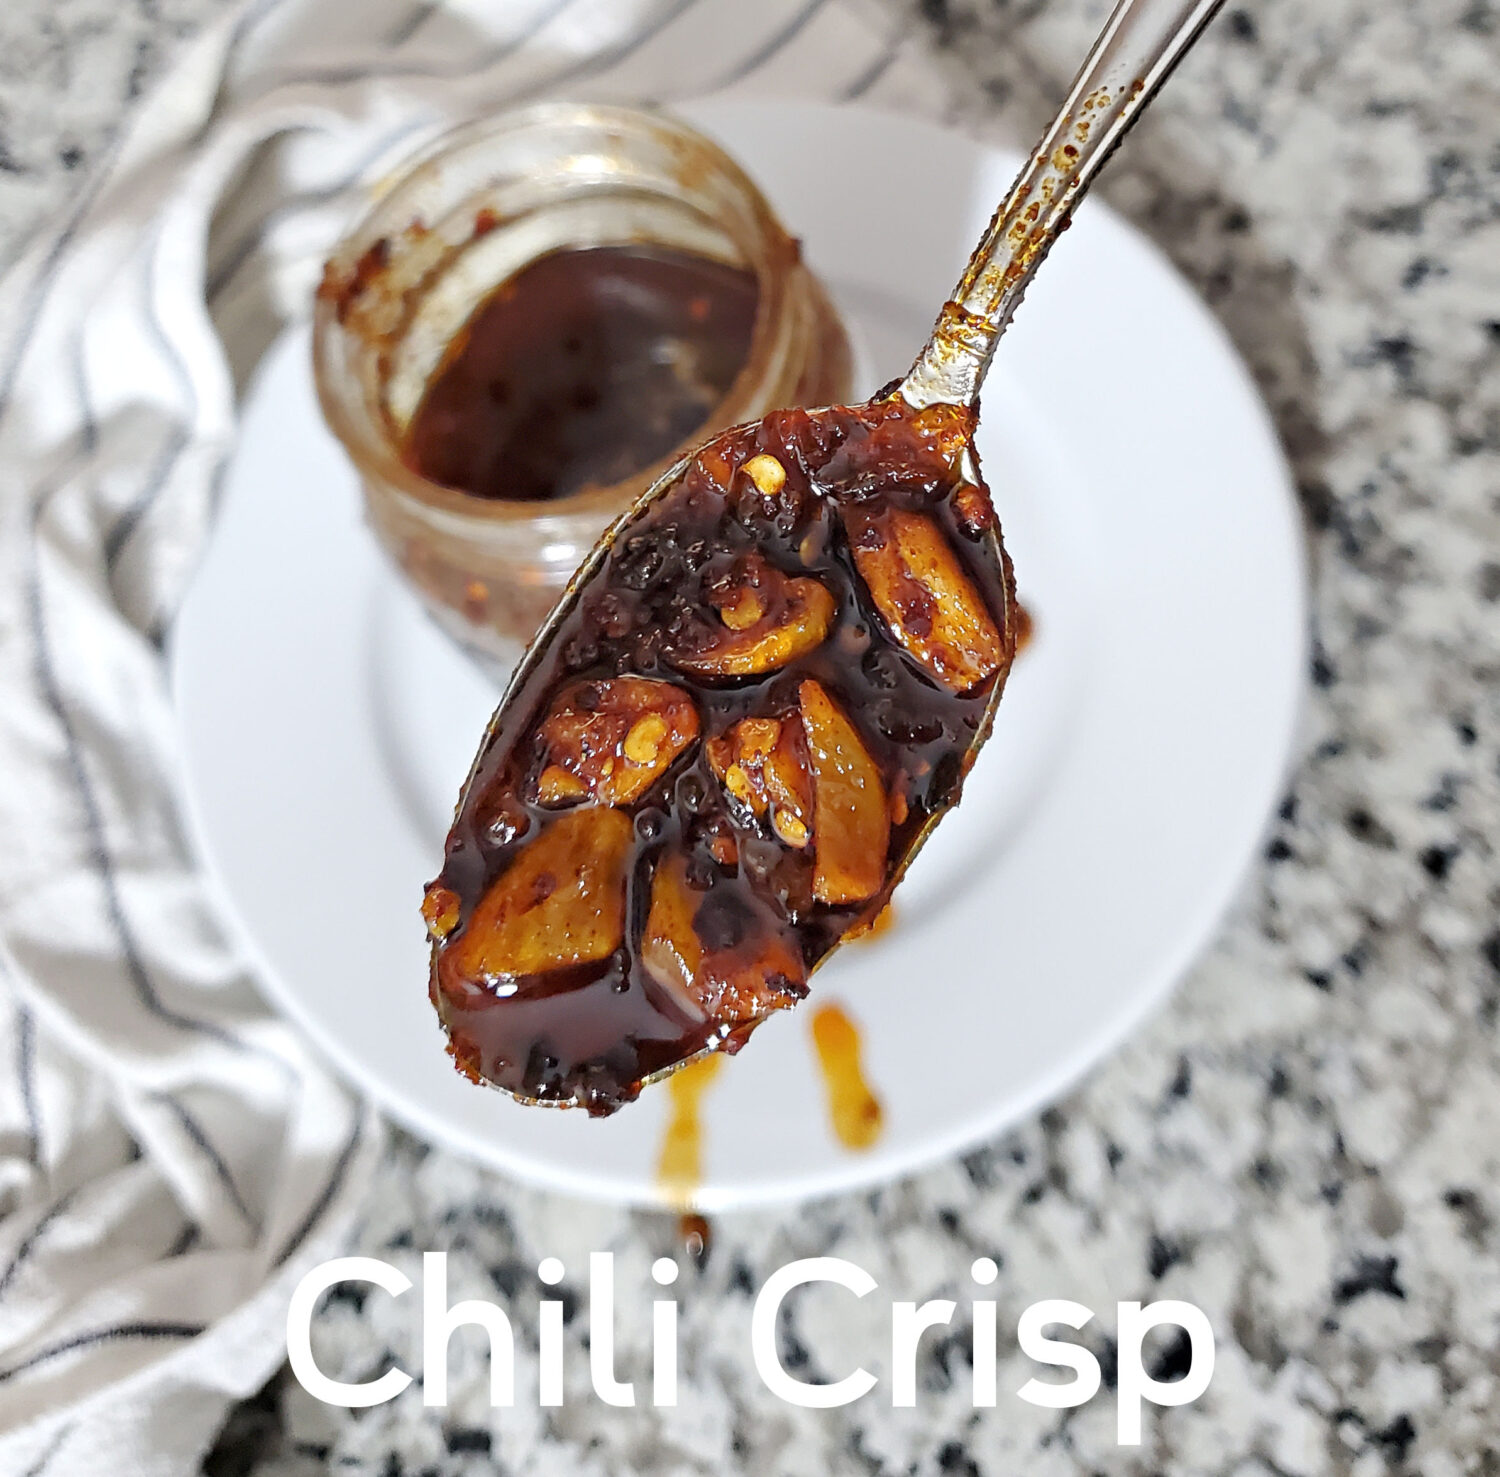 Chili Crisp is an infused chili oil condiment with crunchy bits, with chili peppers, onion, garlic.  Salty, savory and rich umami flavor.